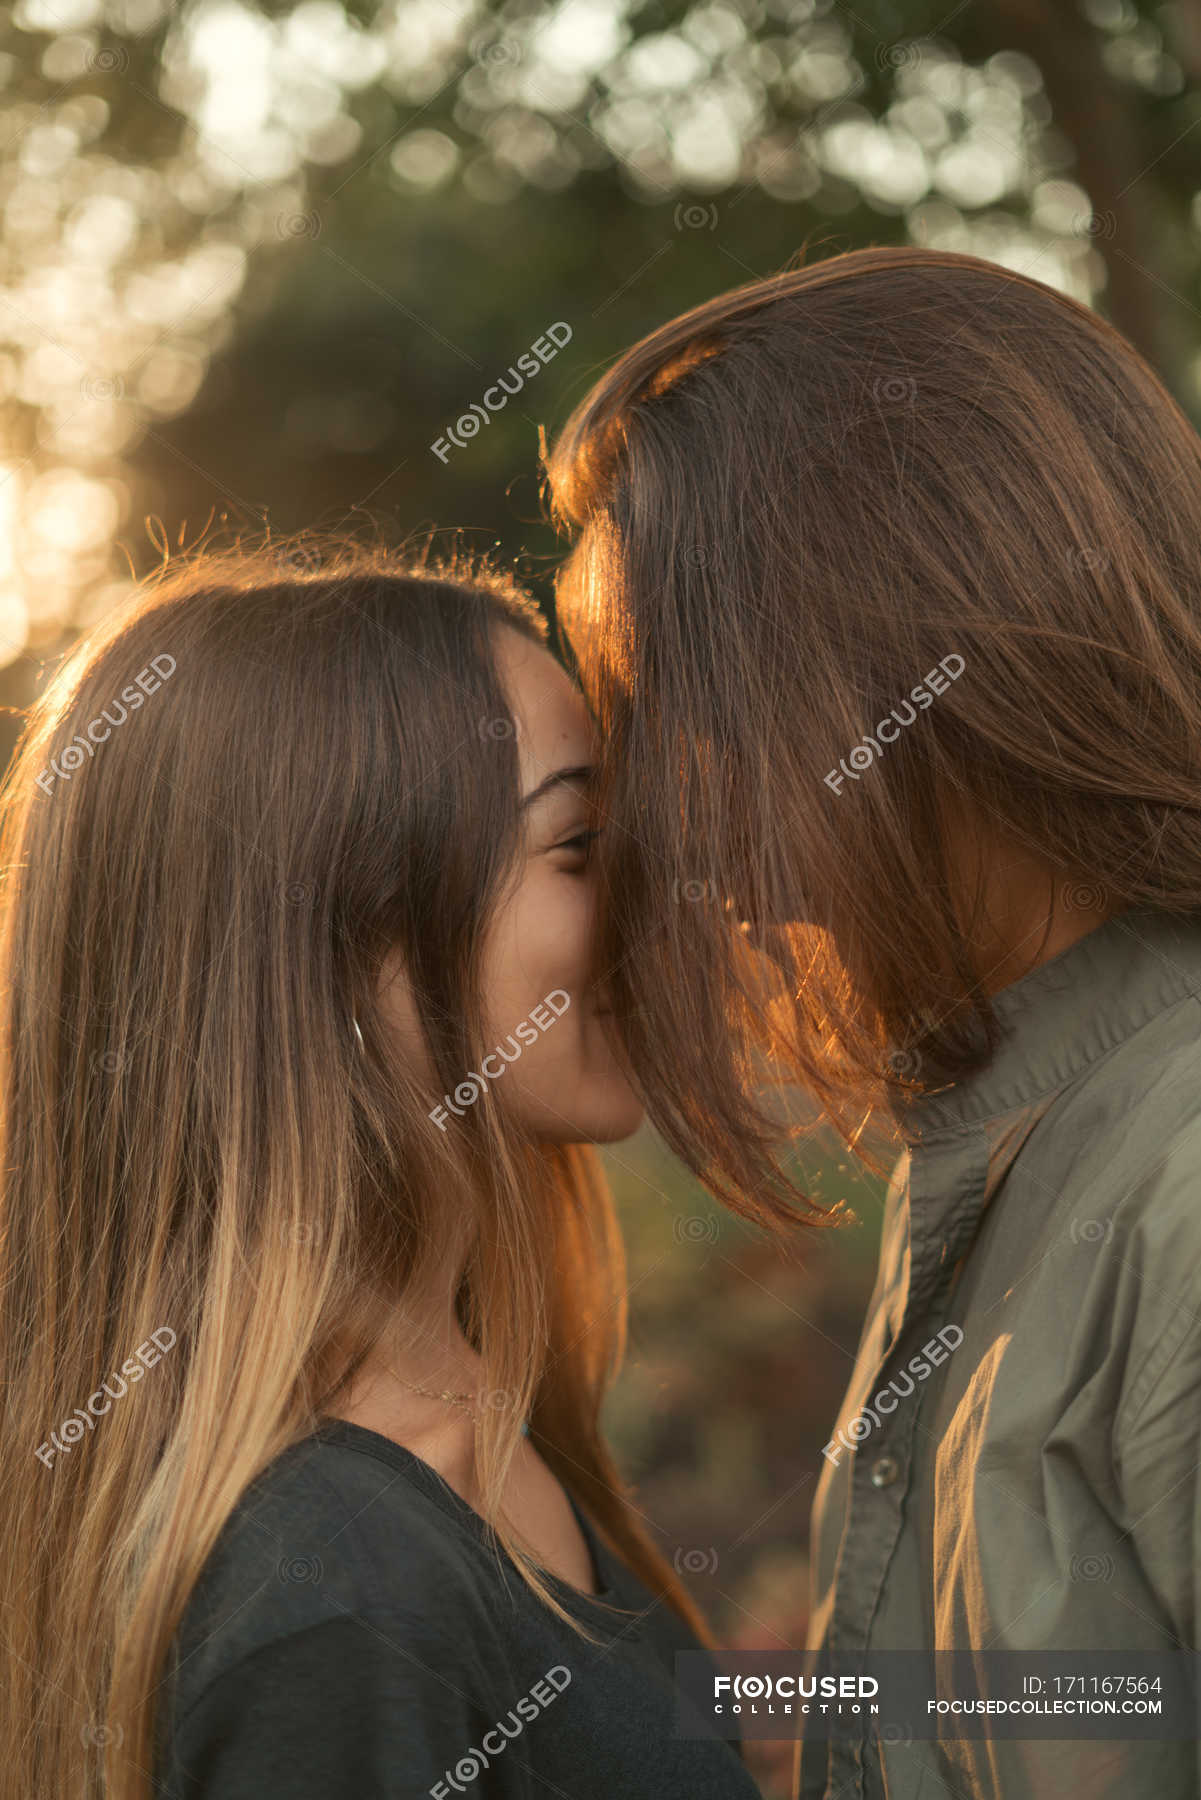 Portrait of boy with long hair hiding face leaning on girlfriend — woman,  20s - Stock Photo | #171167564